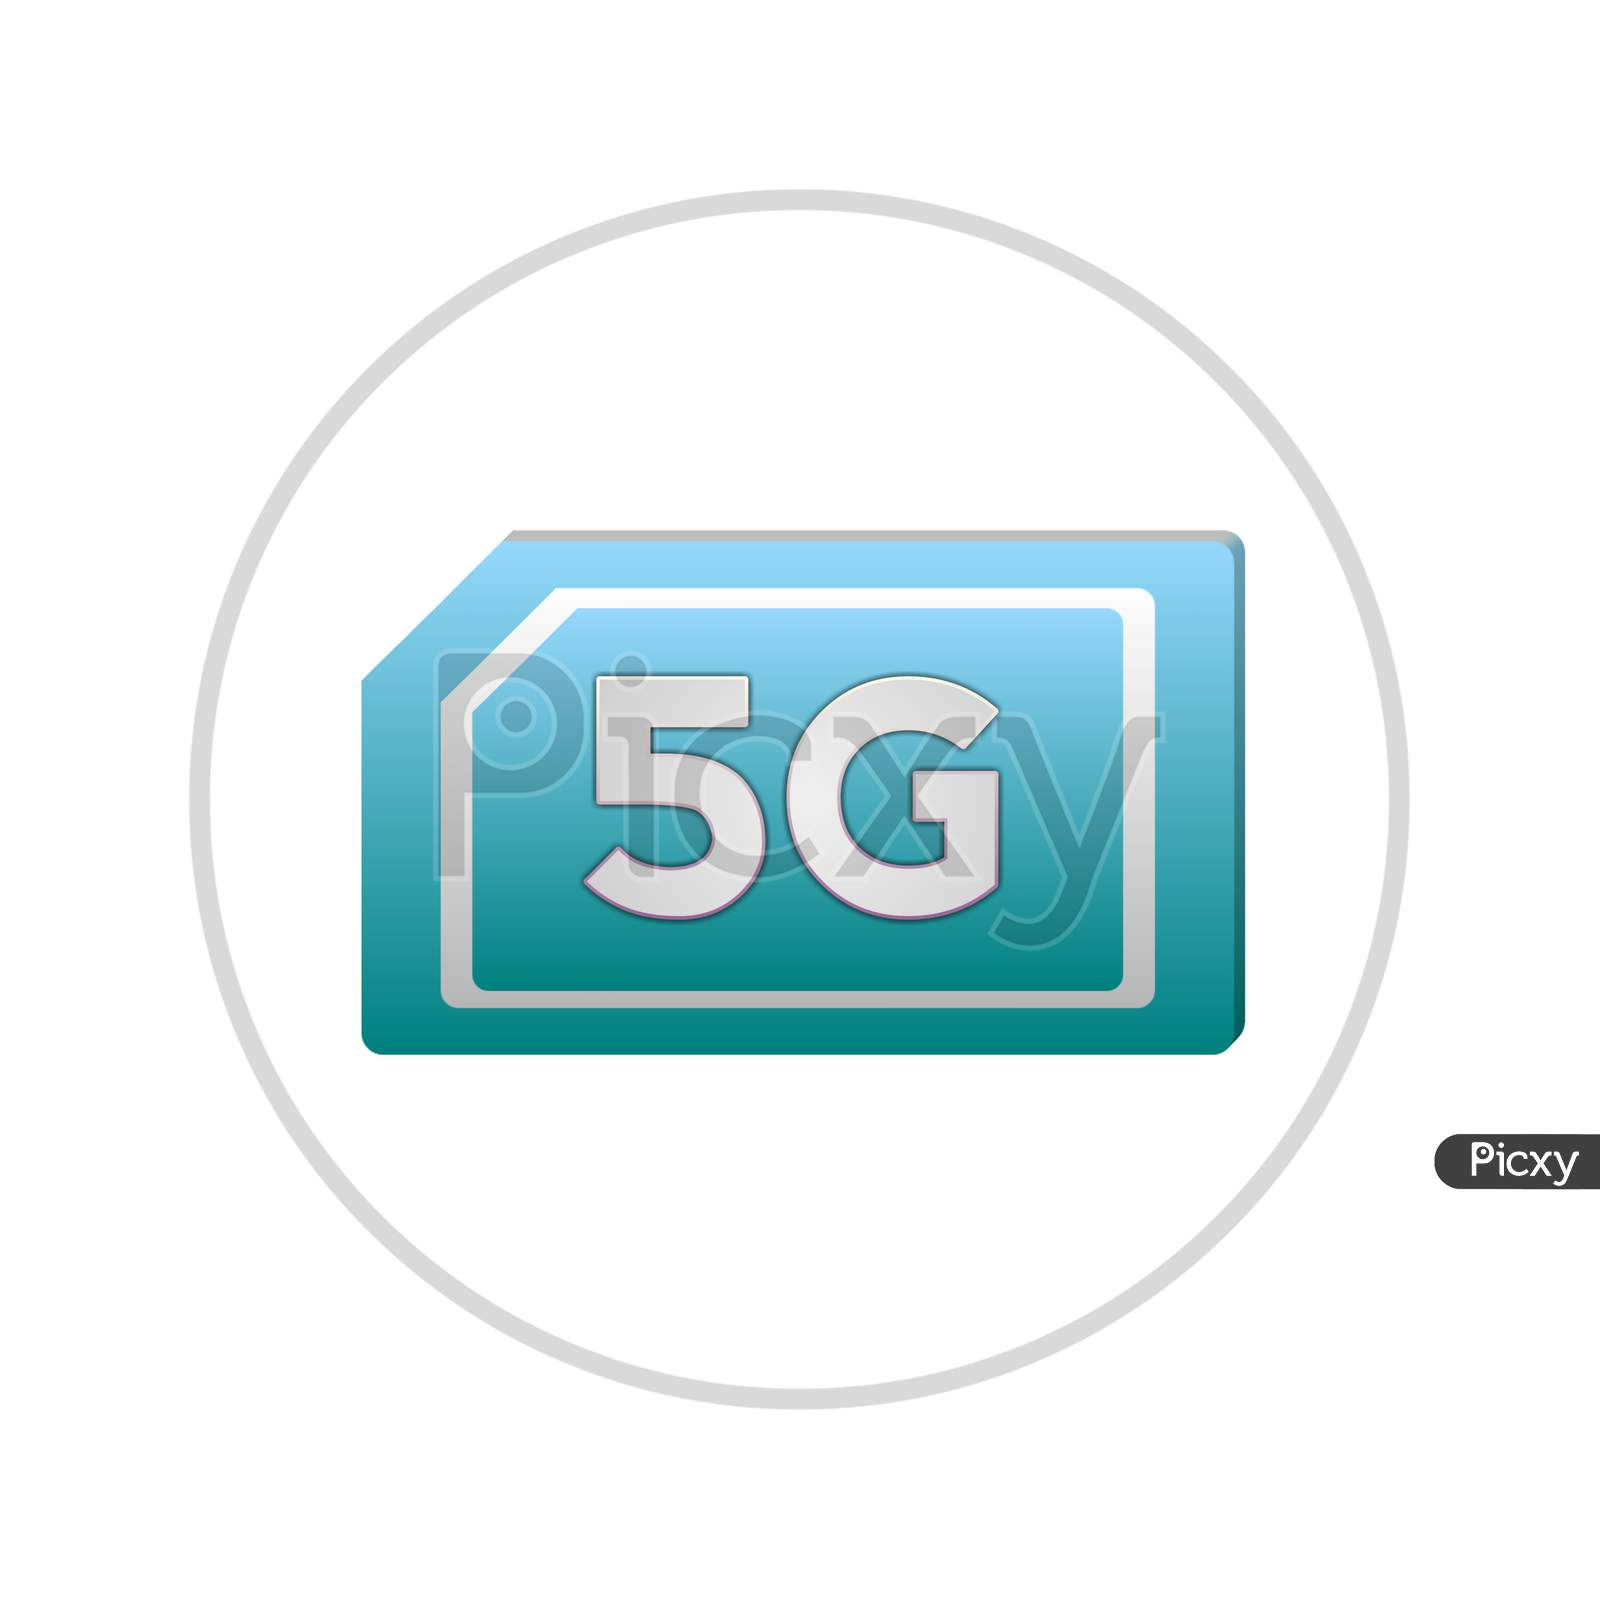 Illustration Of A Blue Color 5G Sim Card, Isolated On A White Background